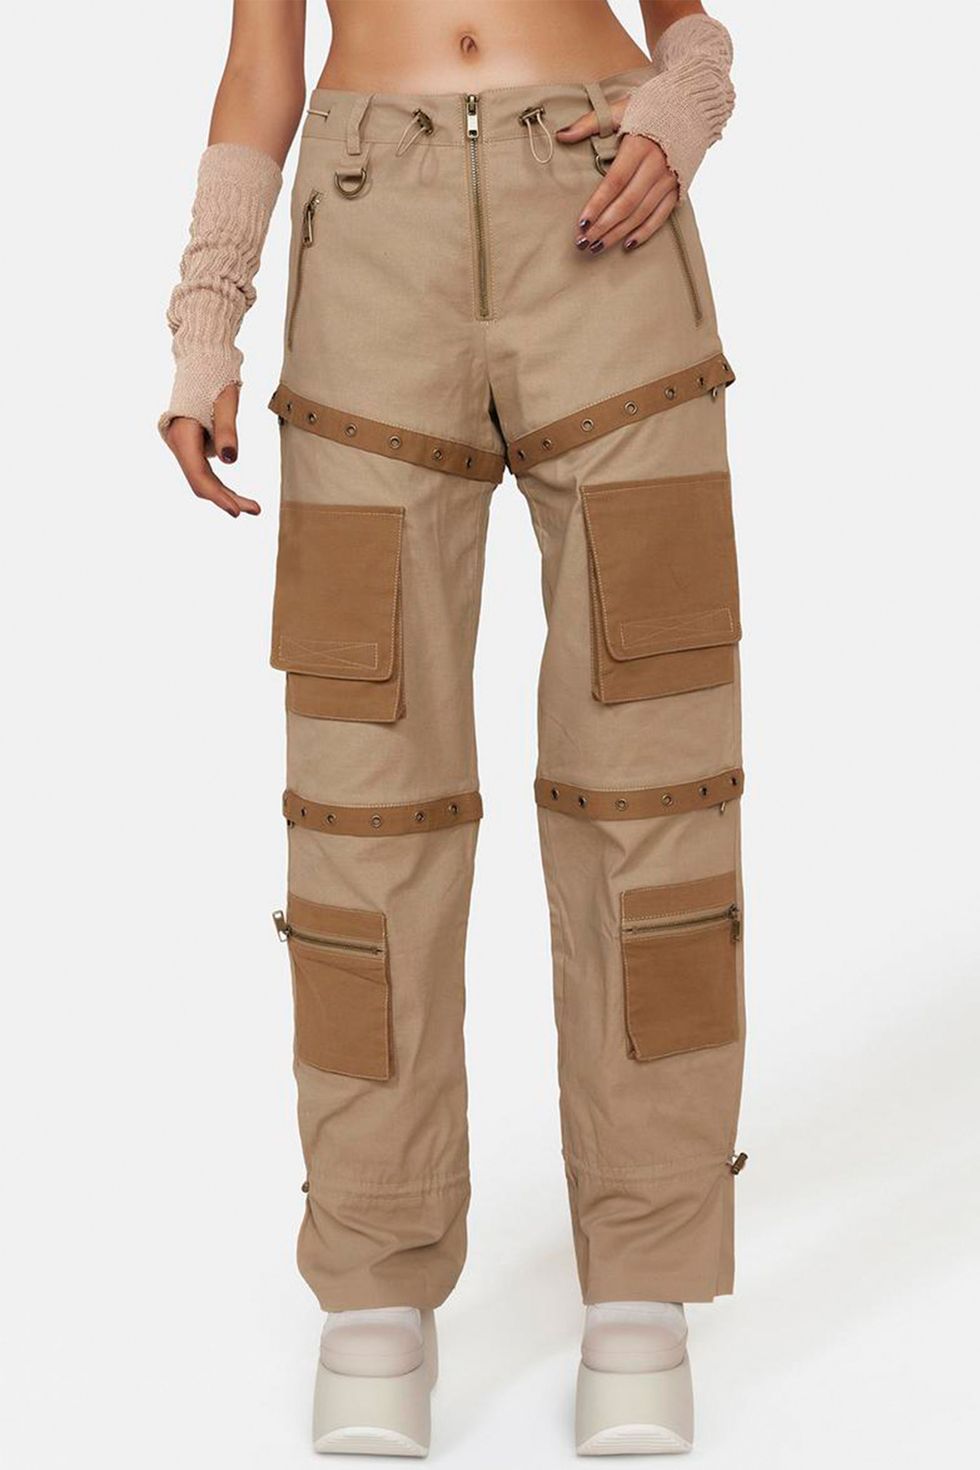 20 best cargo pants for women, according to experts